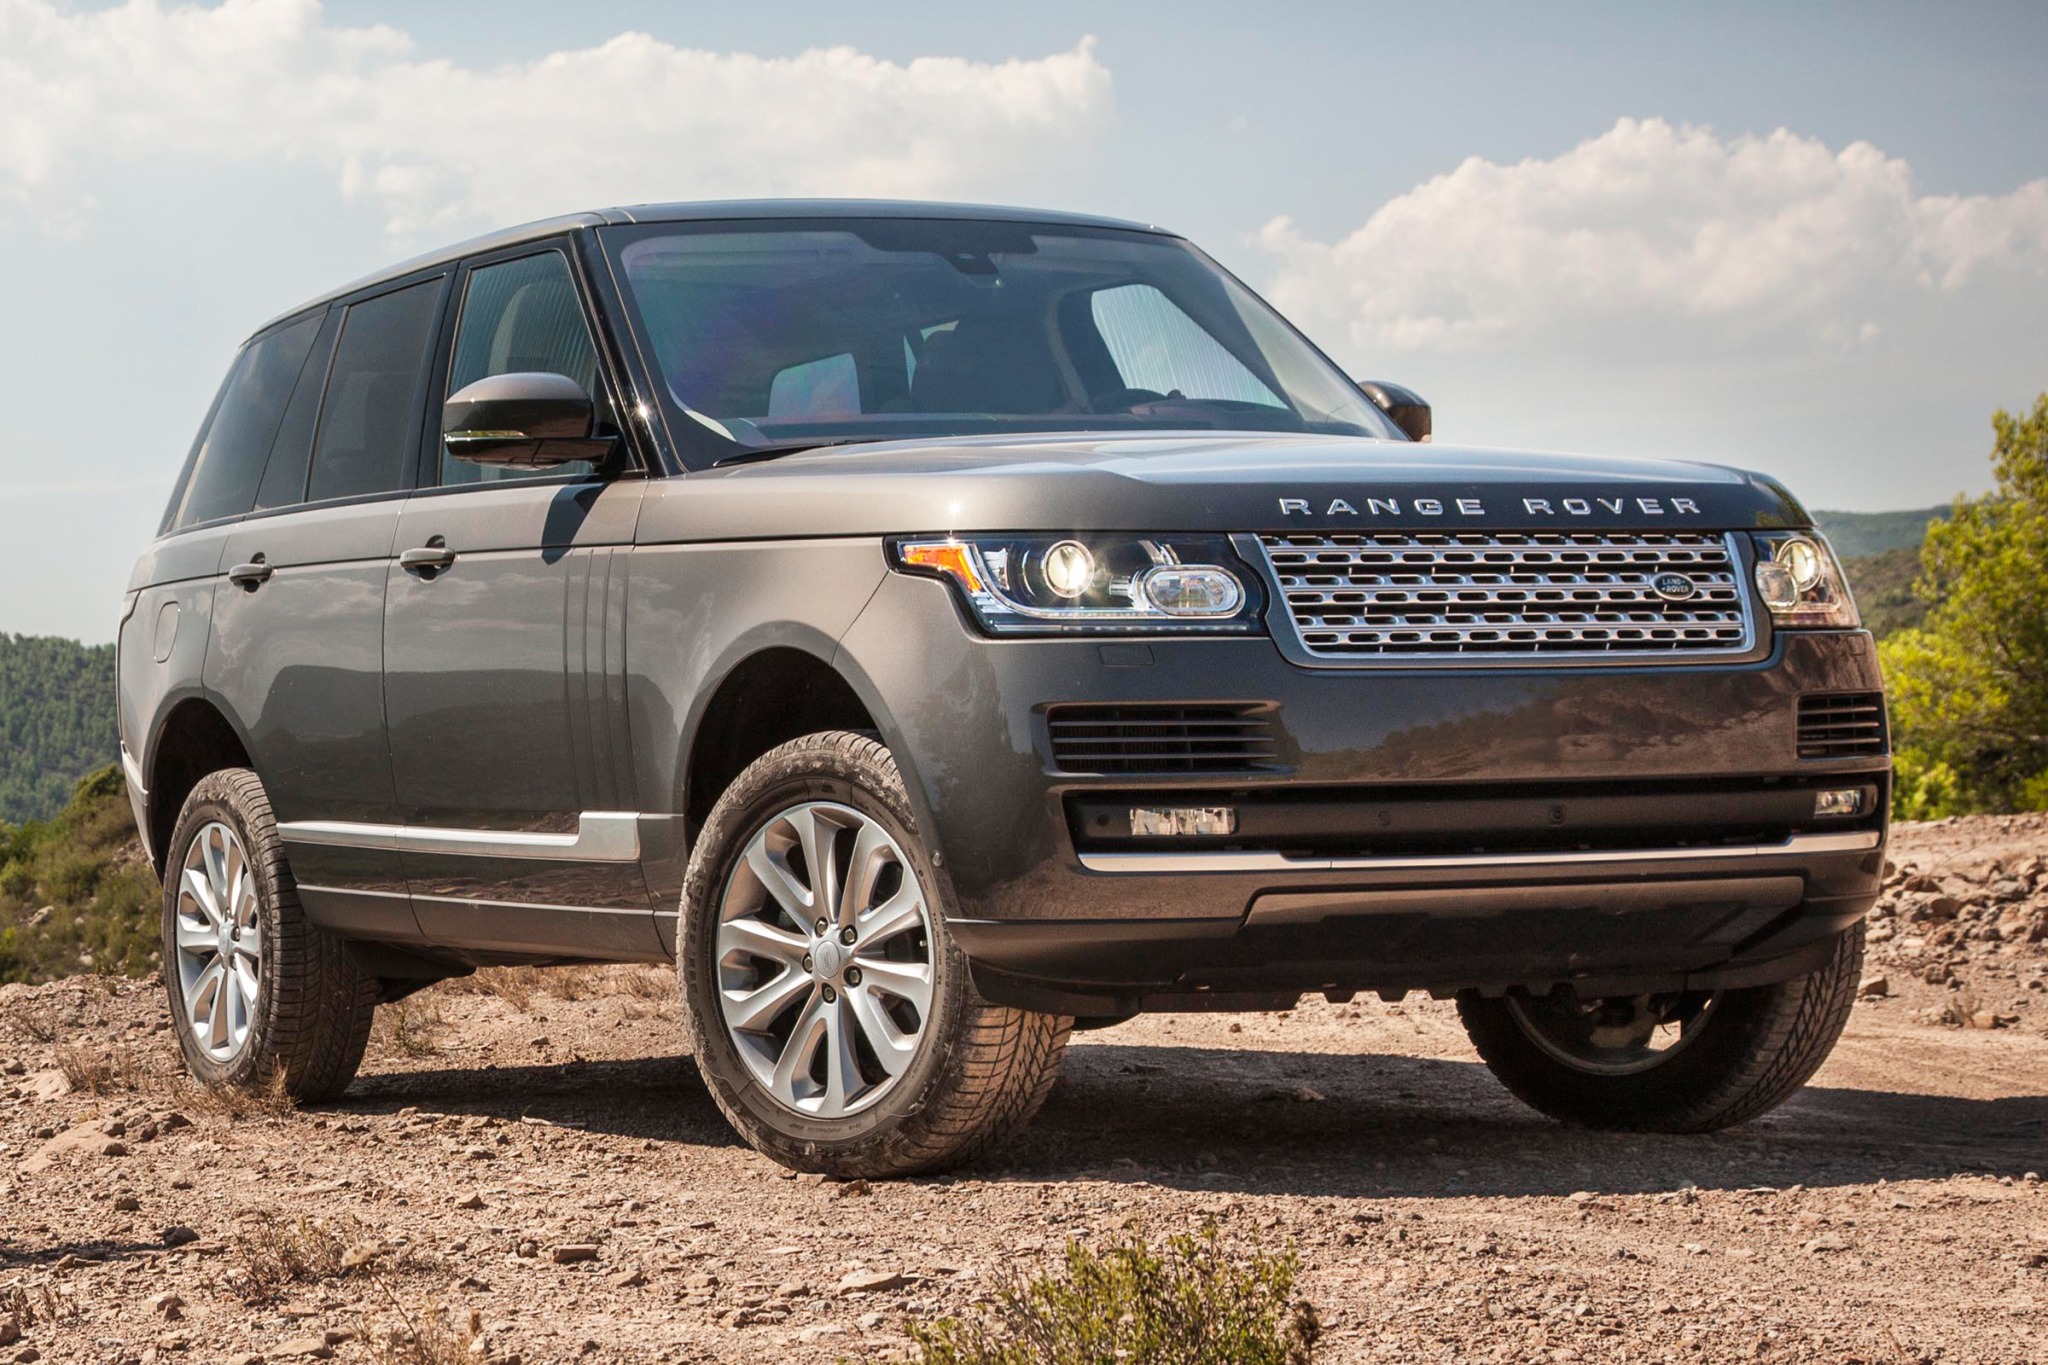 2016 Land Rover Range Rover VIN Number Search AutoDetective